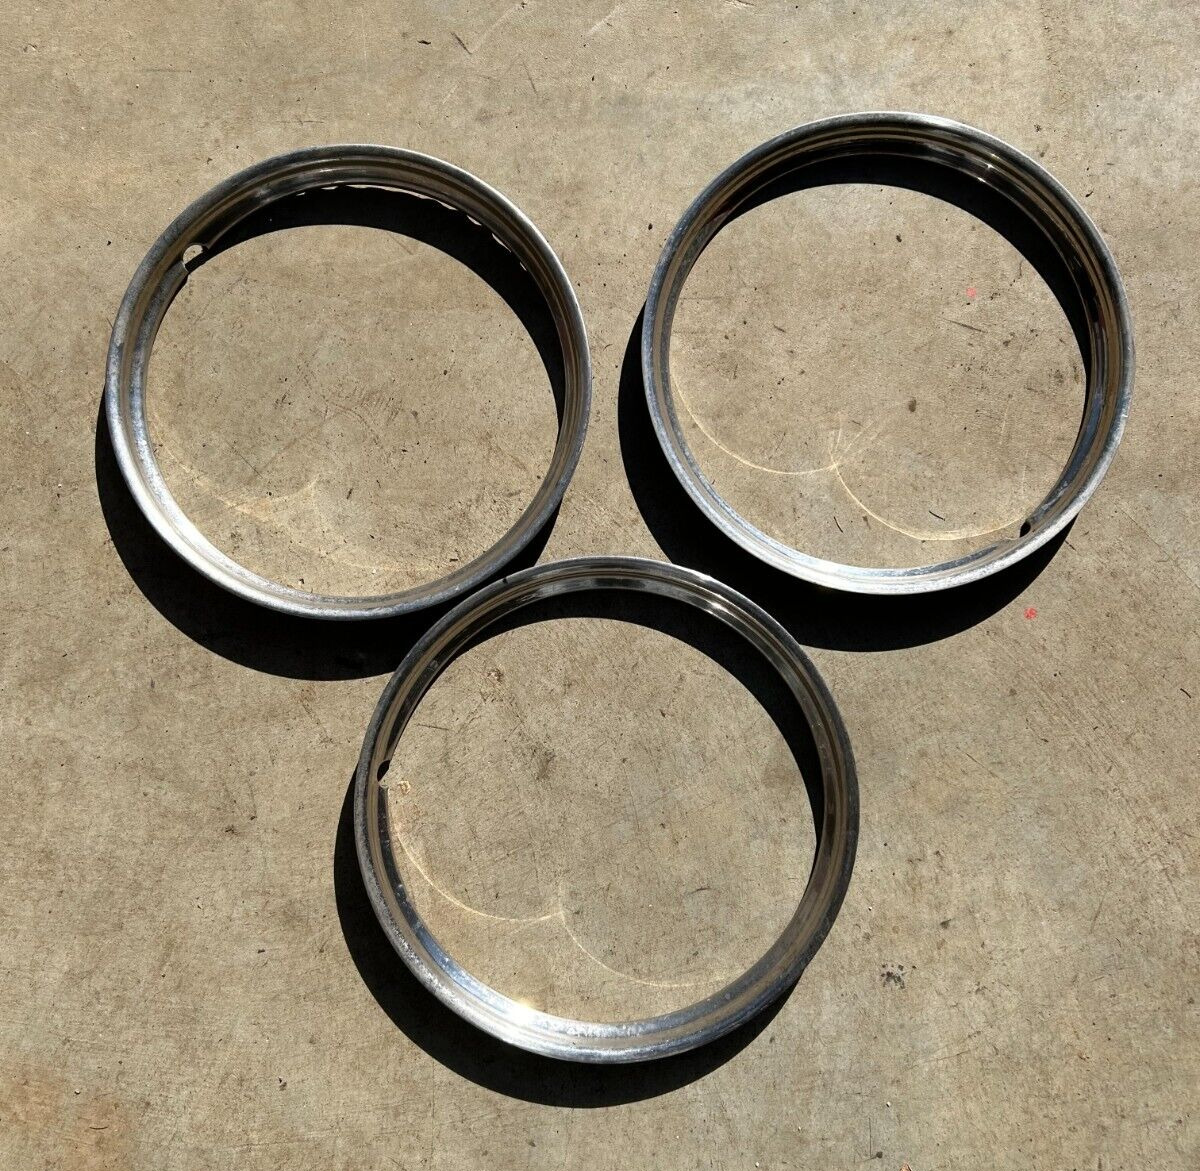 Set of 3 - 15” Vintage Stainless Steel Beauty Trim Rings Studebaker Ford Chevy